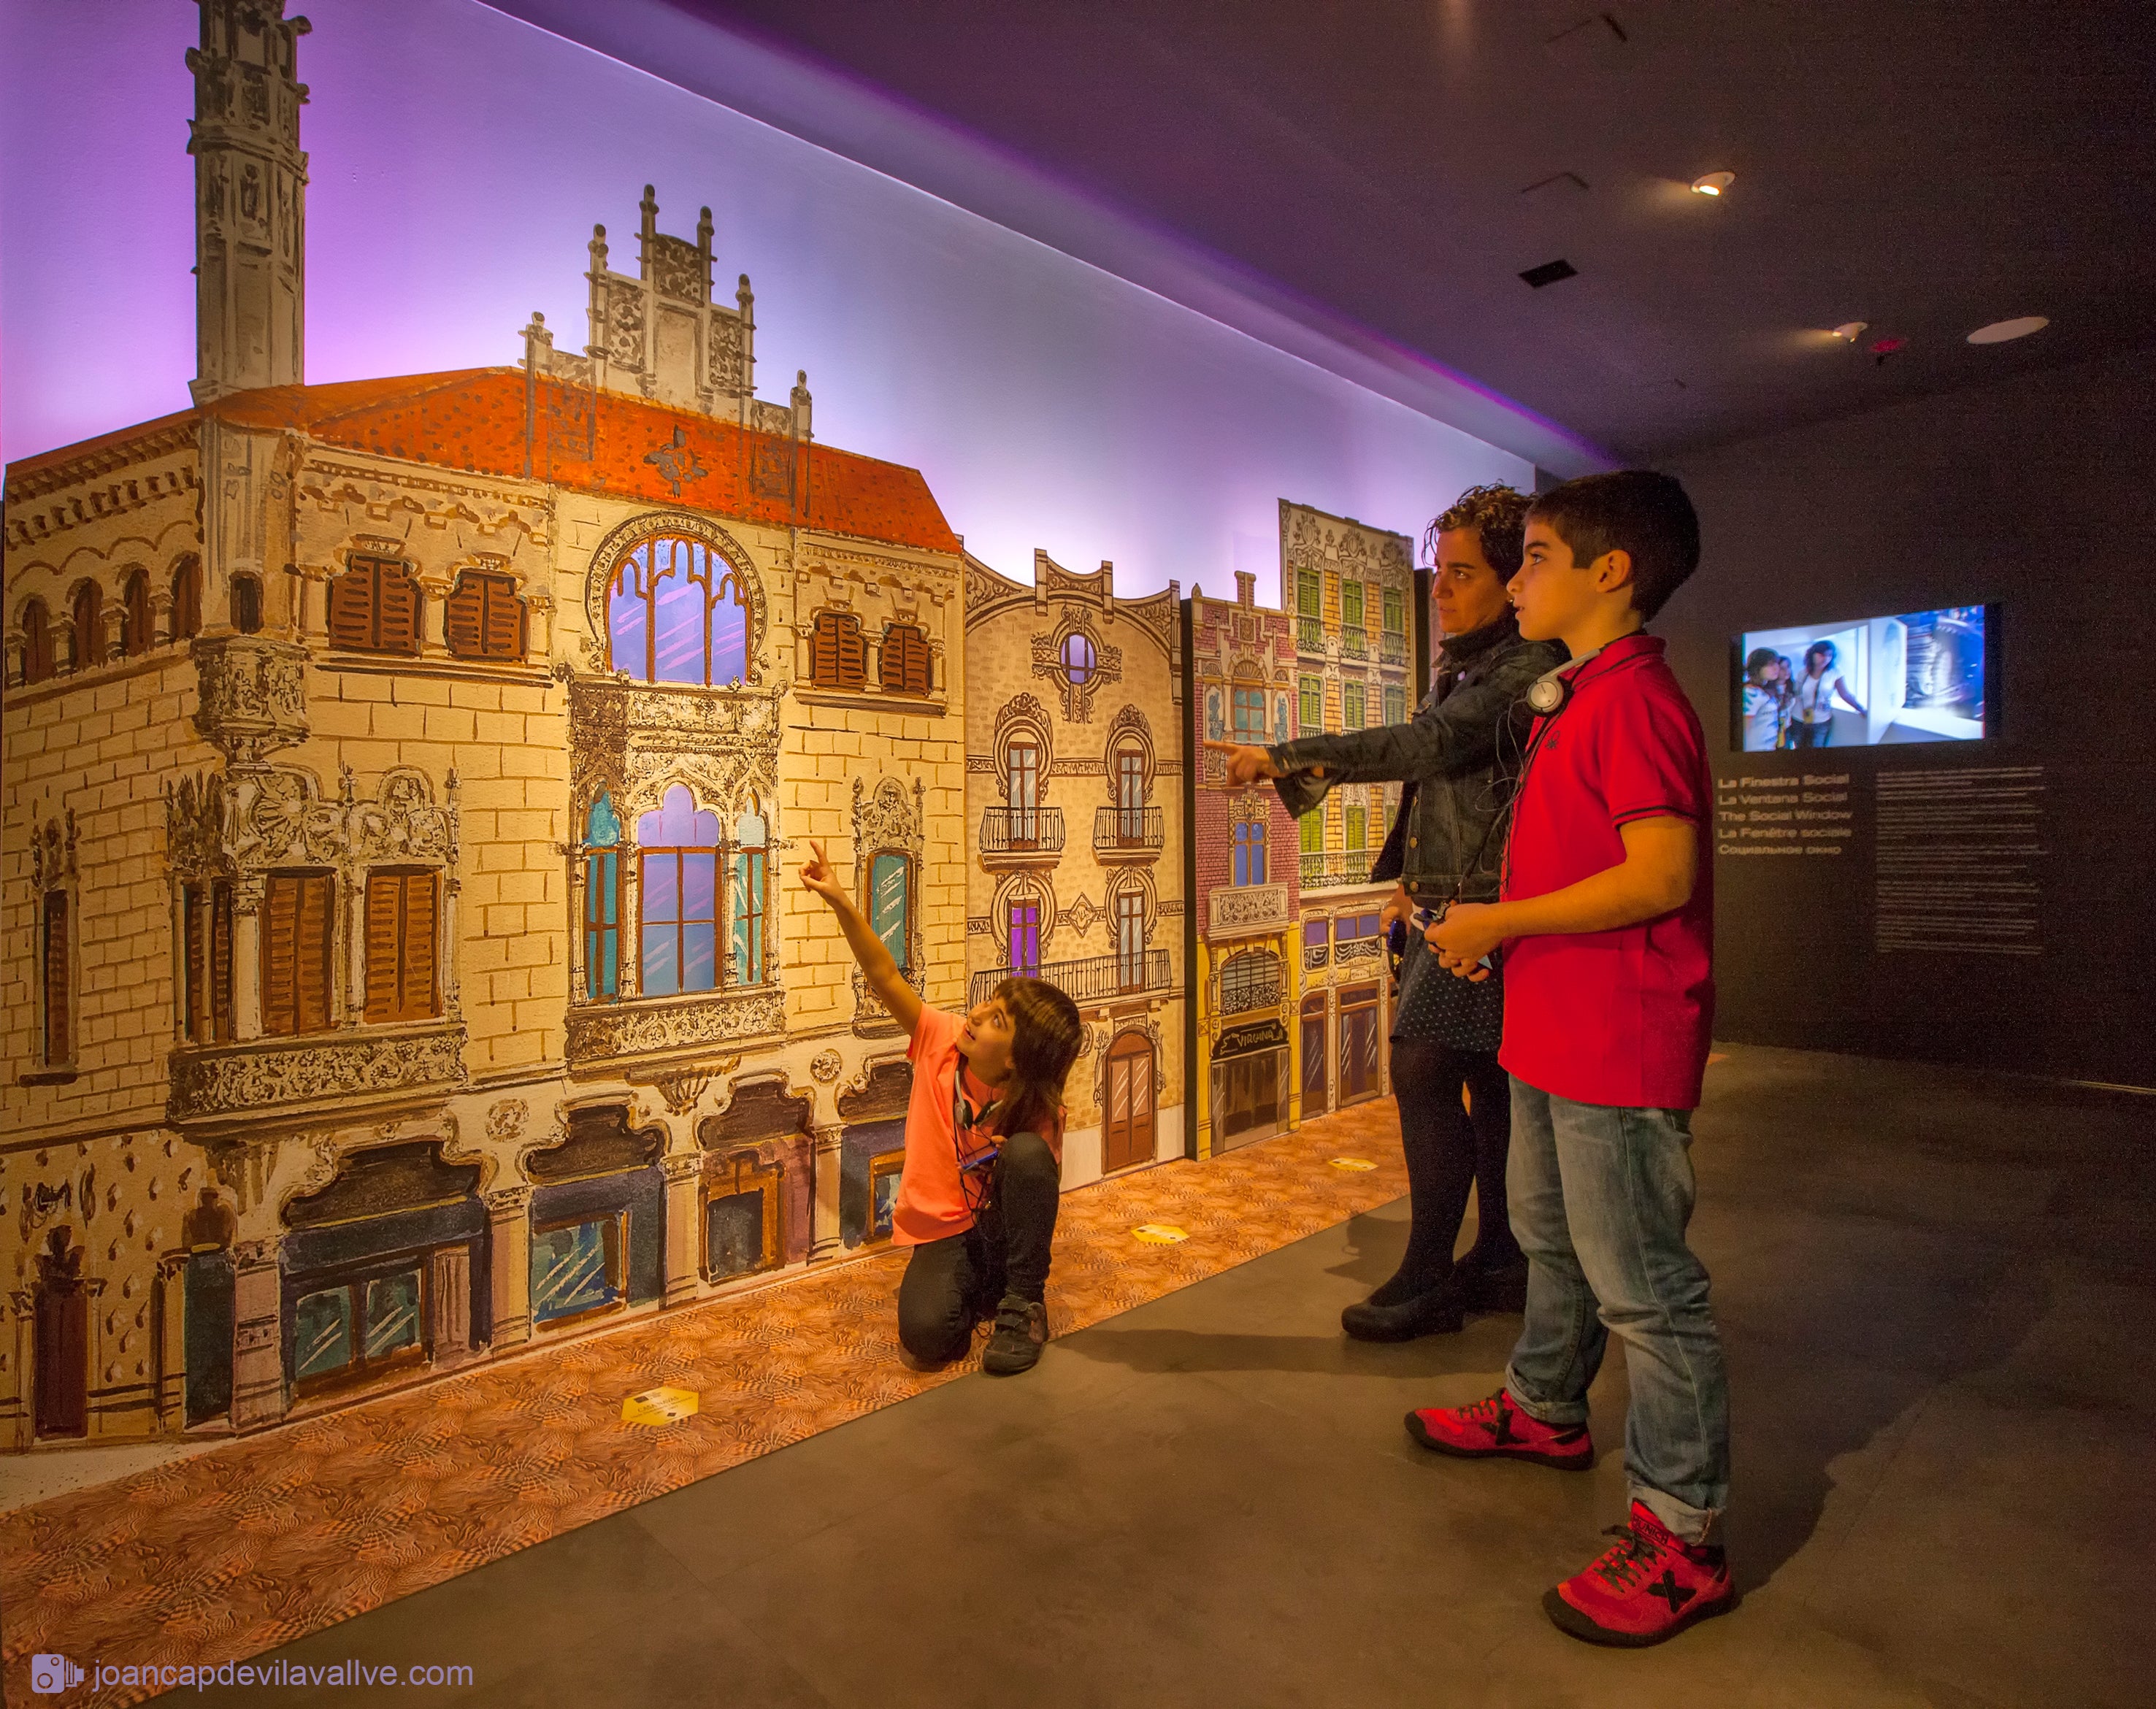 Learn all about the life and works of world renowned designer and architect Antoni Gaudi through the interactive displays at the Gaudi Centre in Reus